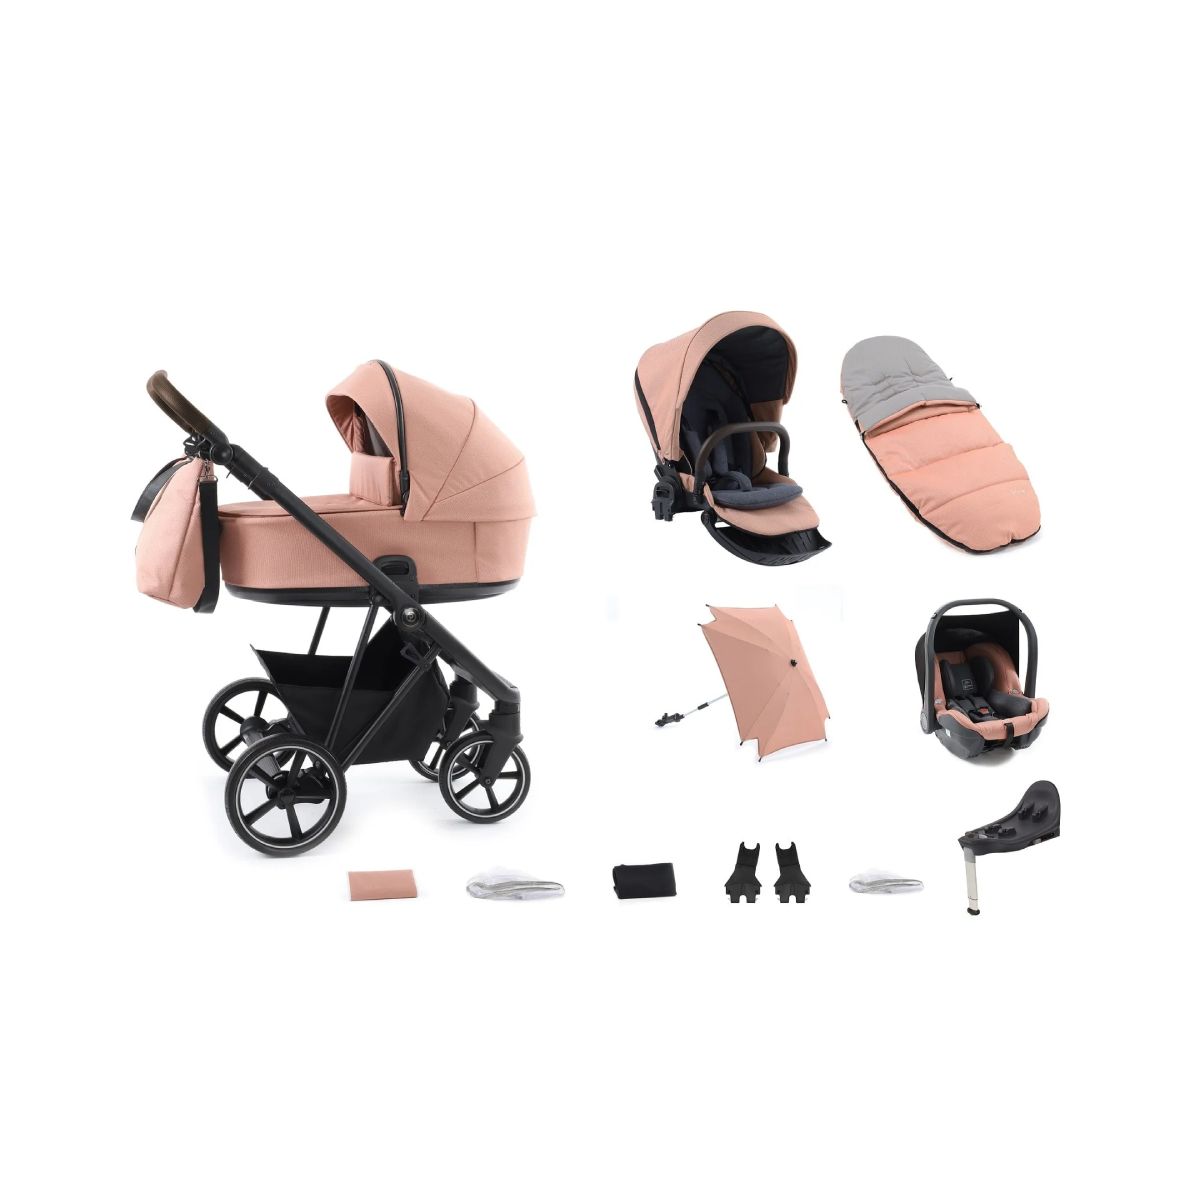 Babystyle Prestige with Vogue Chassis 13 Piece Bundle